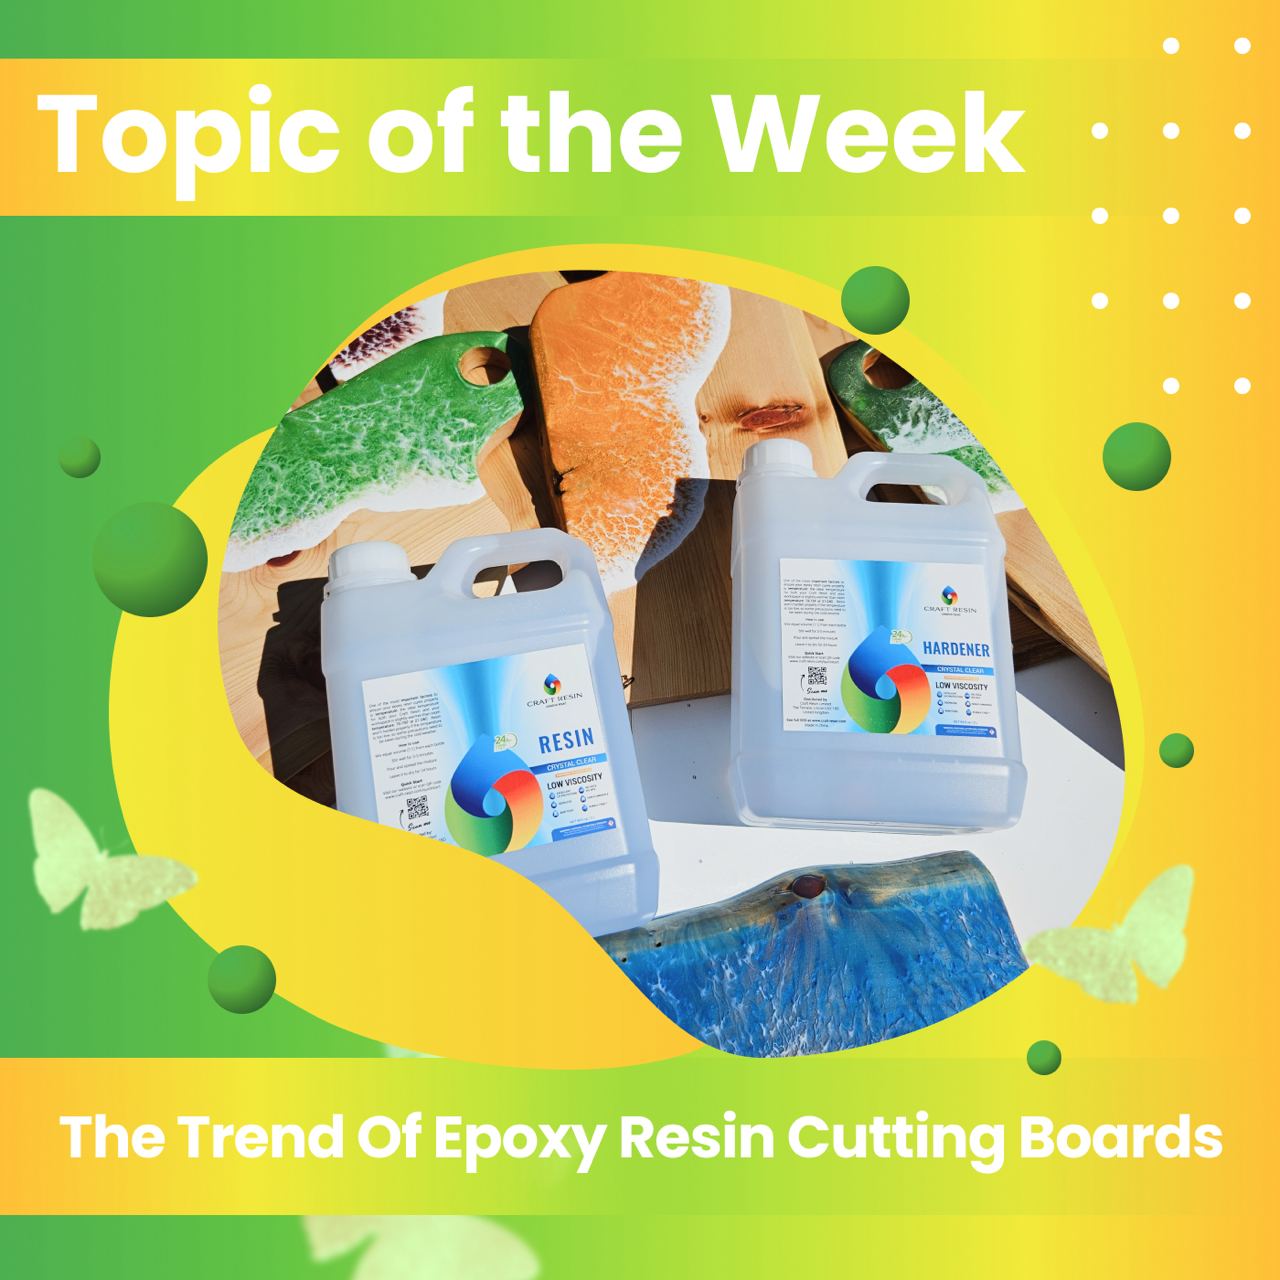 The Trend of Epoxy Resin Cutting Boards - Craft Resin